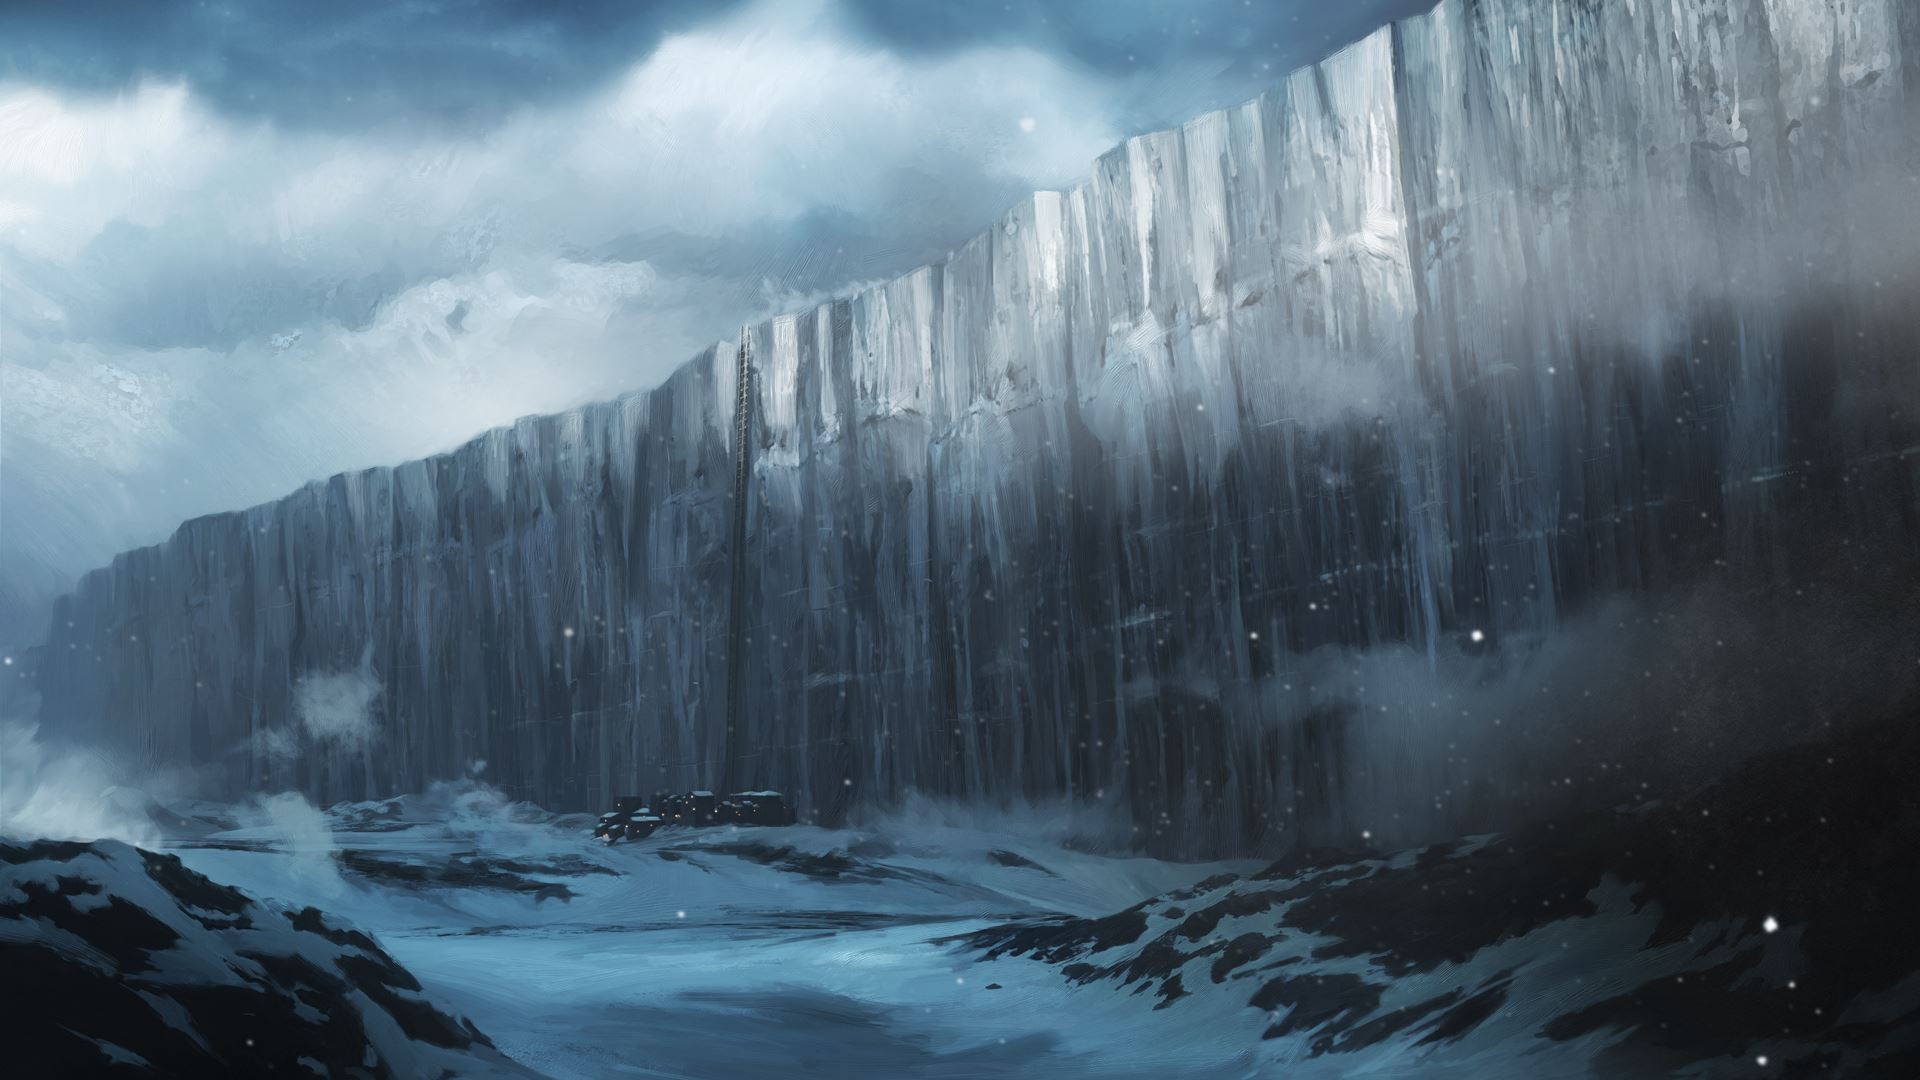  Game  of Thrones  Fantasy art Artwork The Wall Wallpapers  